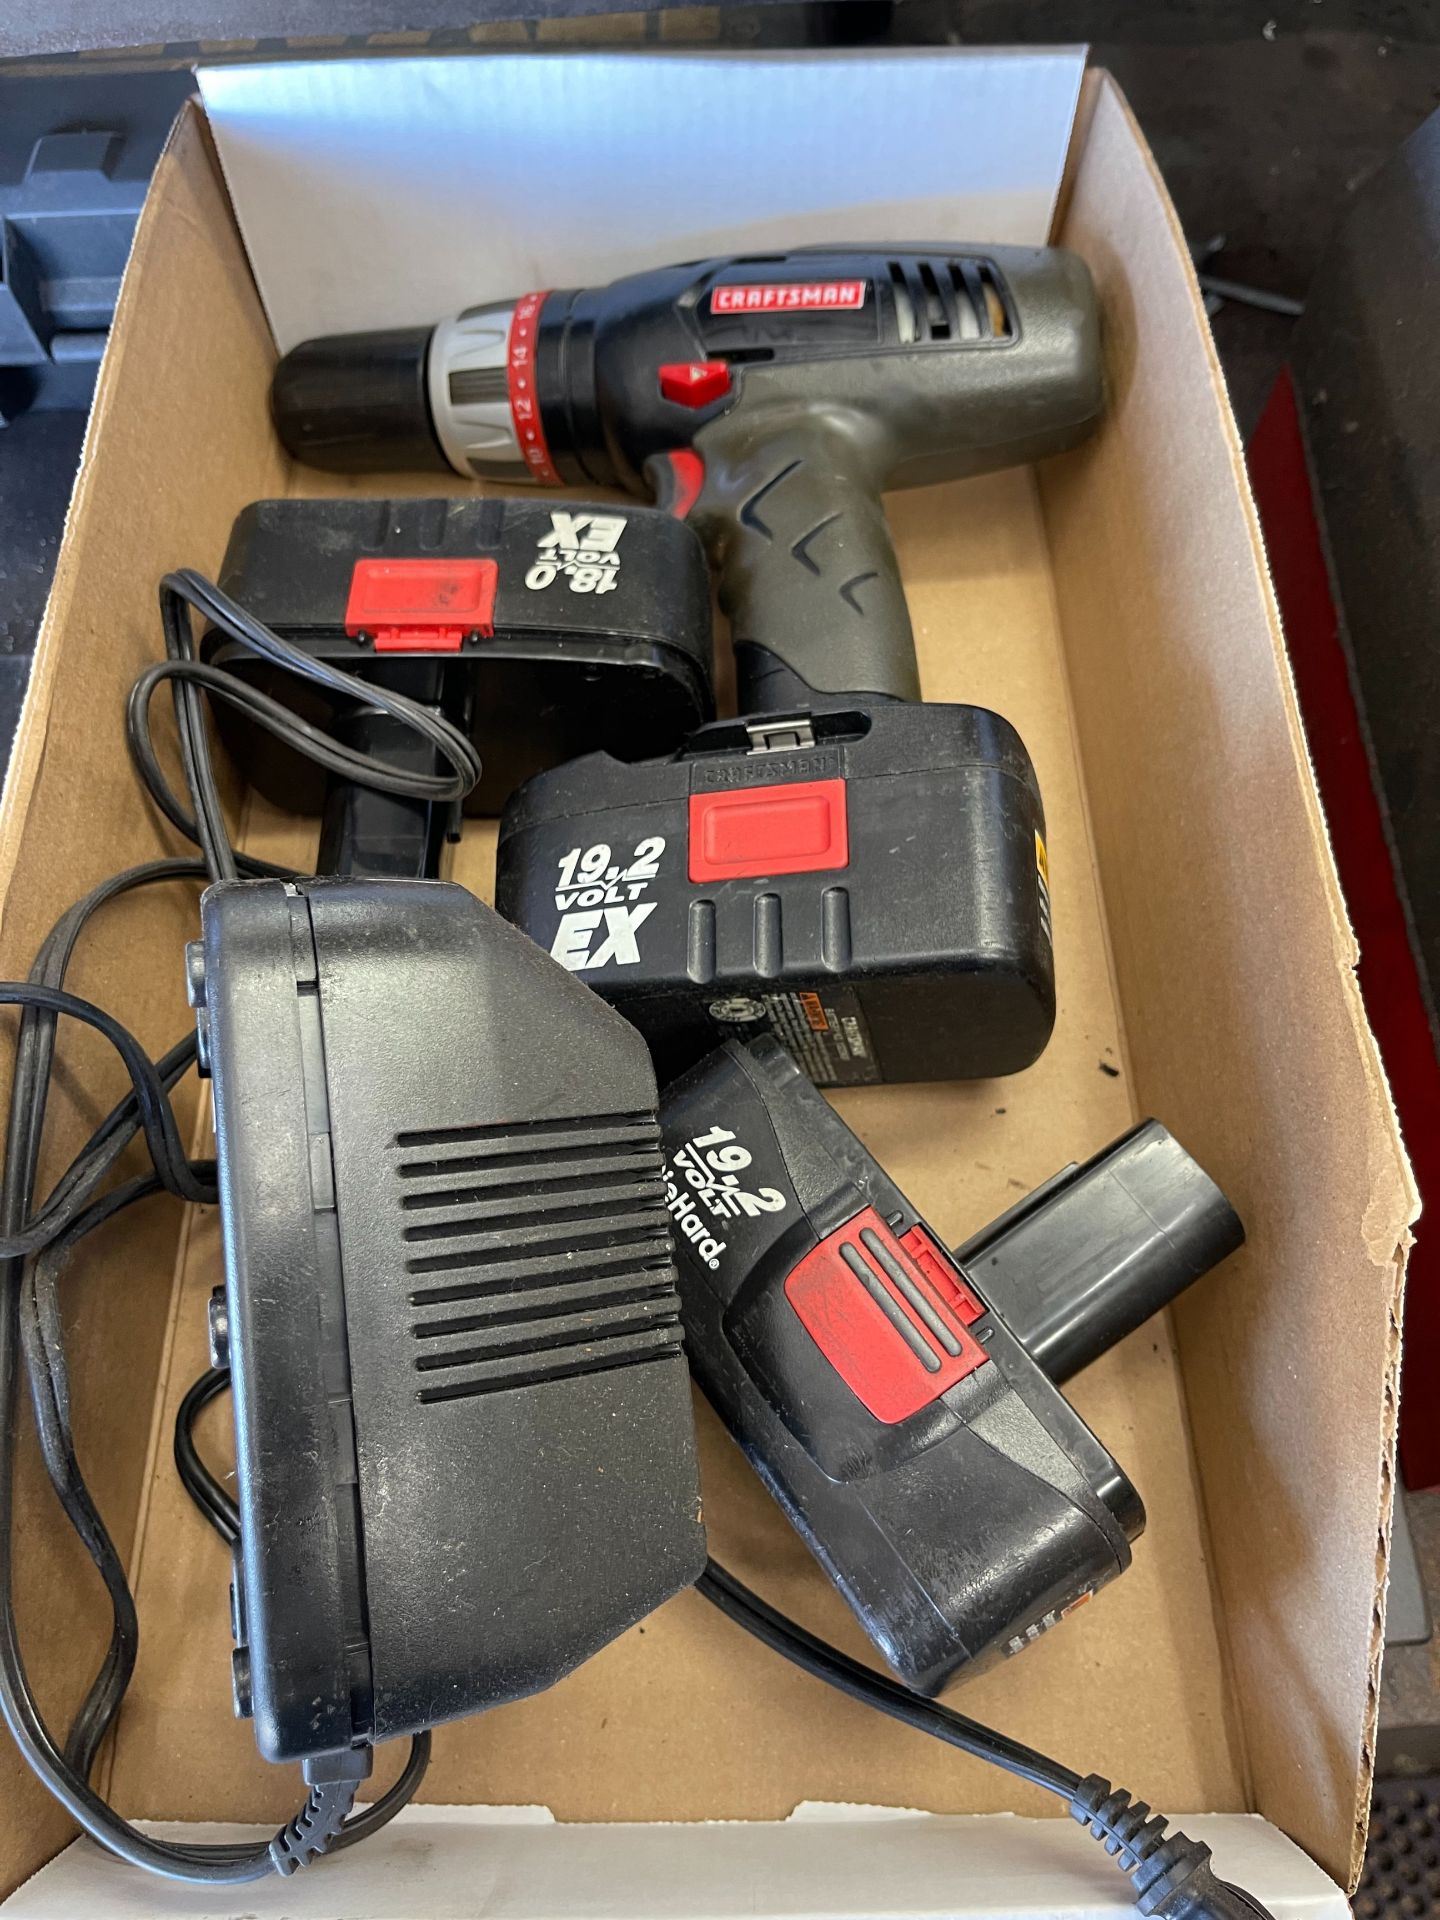 LOT - CRAFTSMAN DRILL, W/ CHARGER